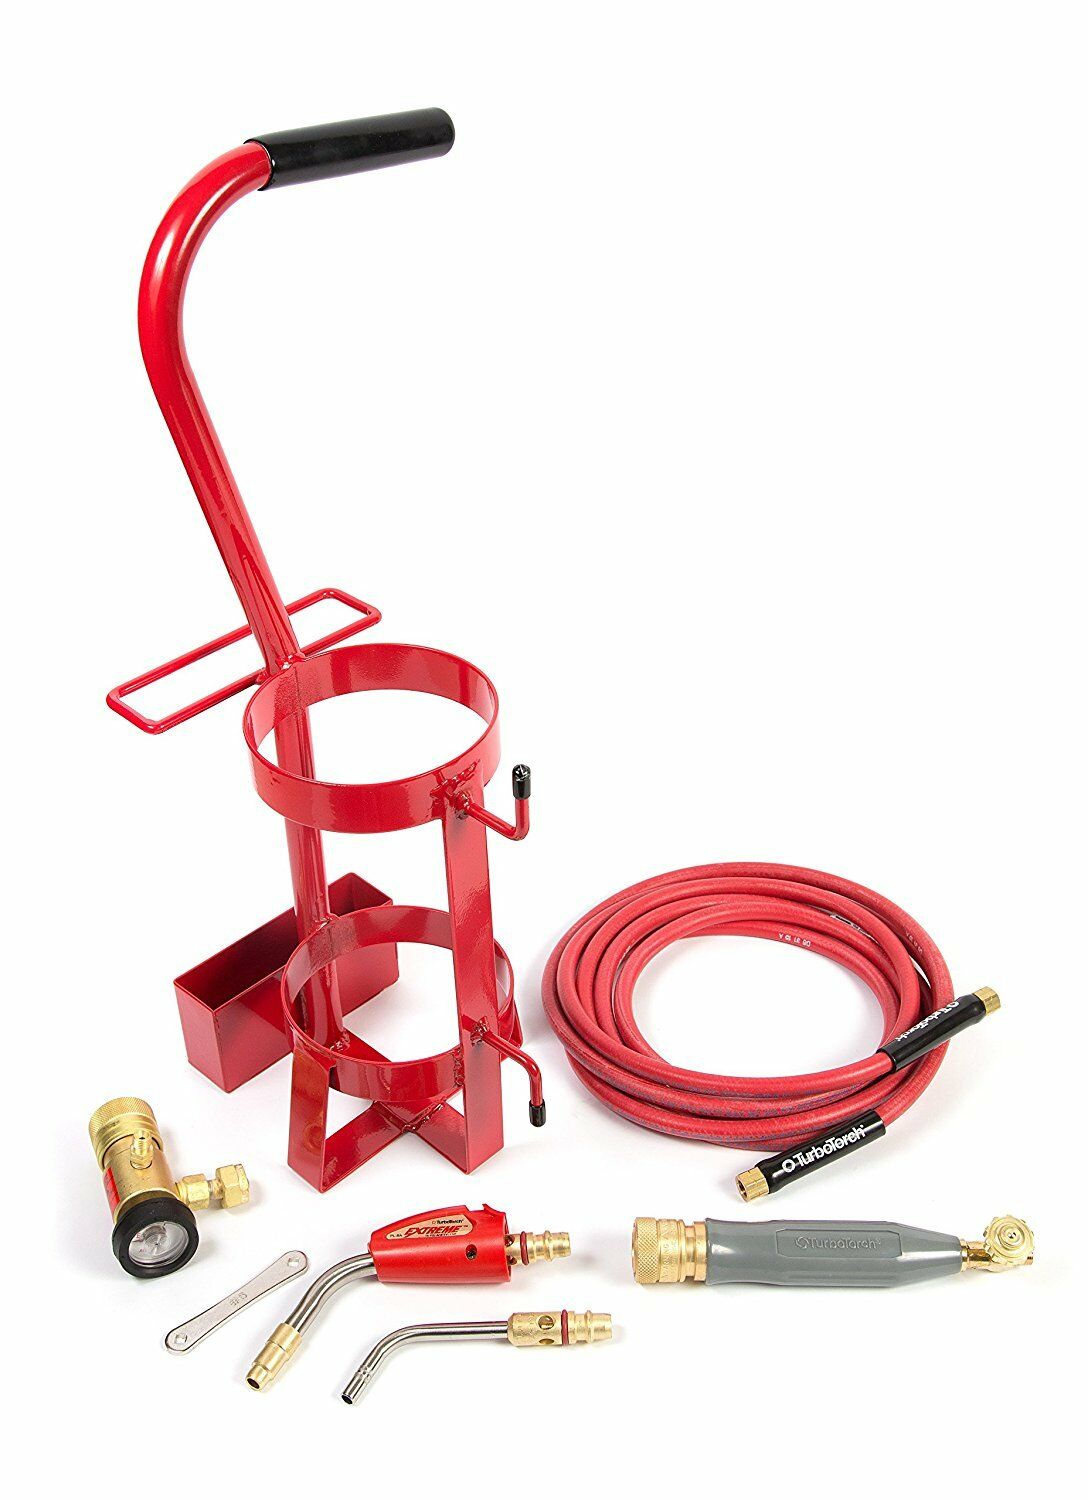 Turbotorch Tdlx2003mc Air Acetylene Carrier Kit Swirl Without Tank, 0426-0011